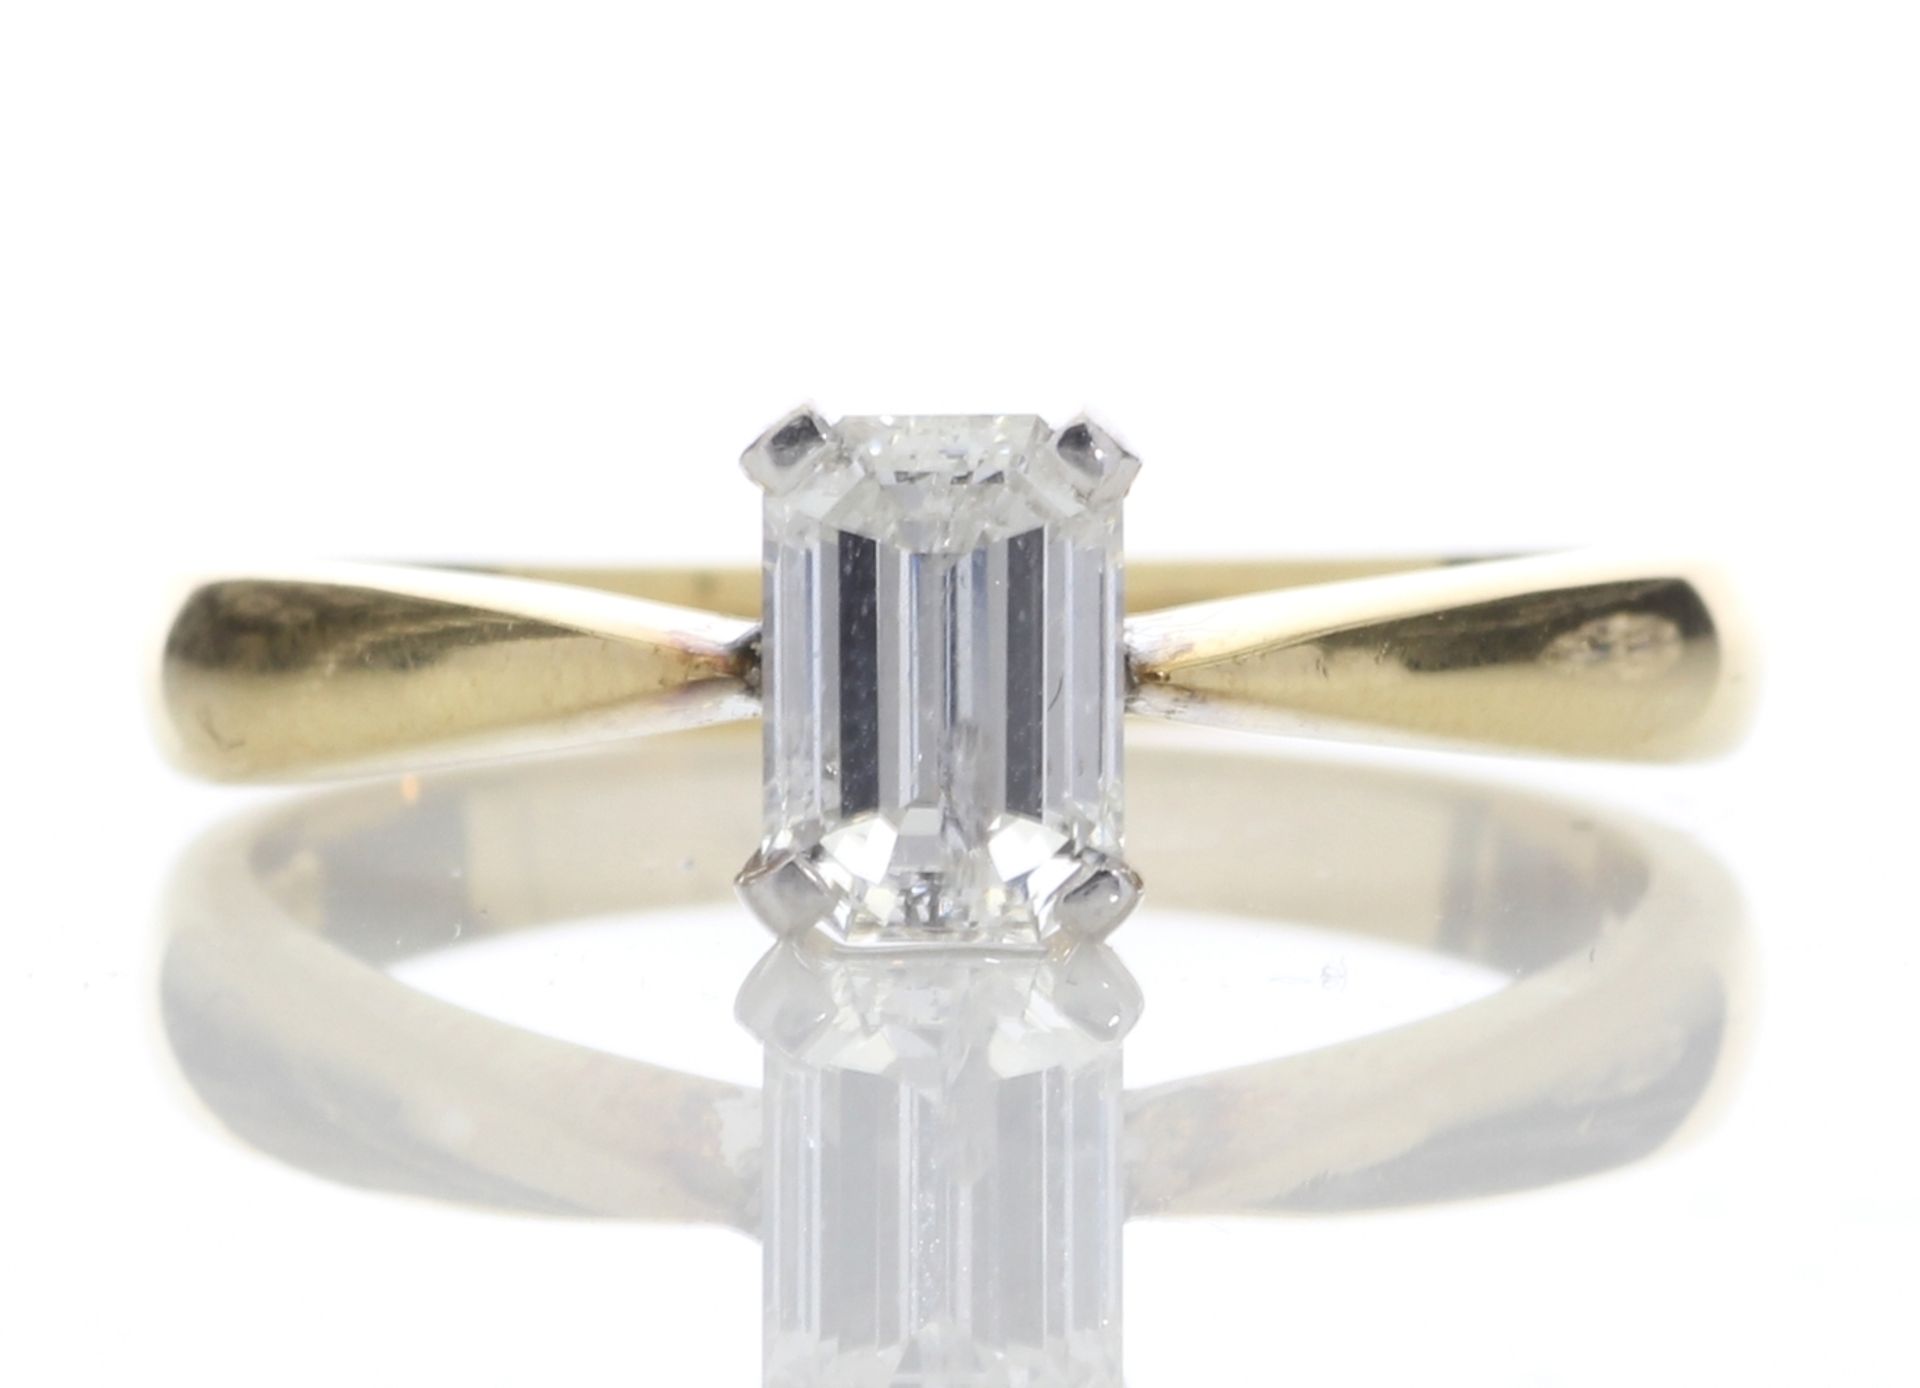 Valued by GIE £11,495.00 - 18ct Single Stone Emerald Cut Diamond Ring D SI3 0.72 Carats - 1125013,